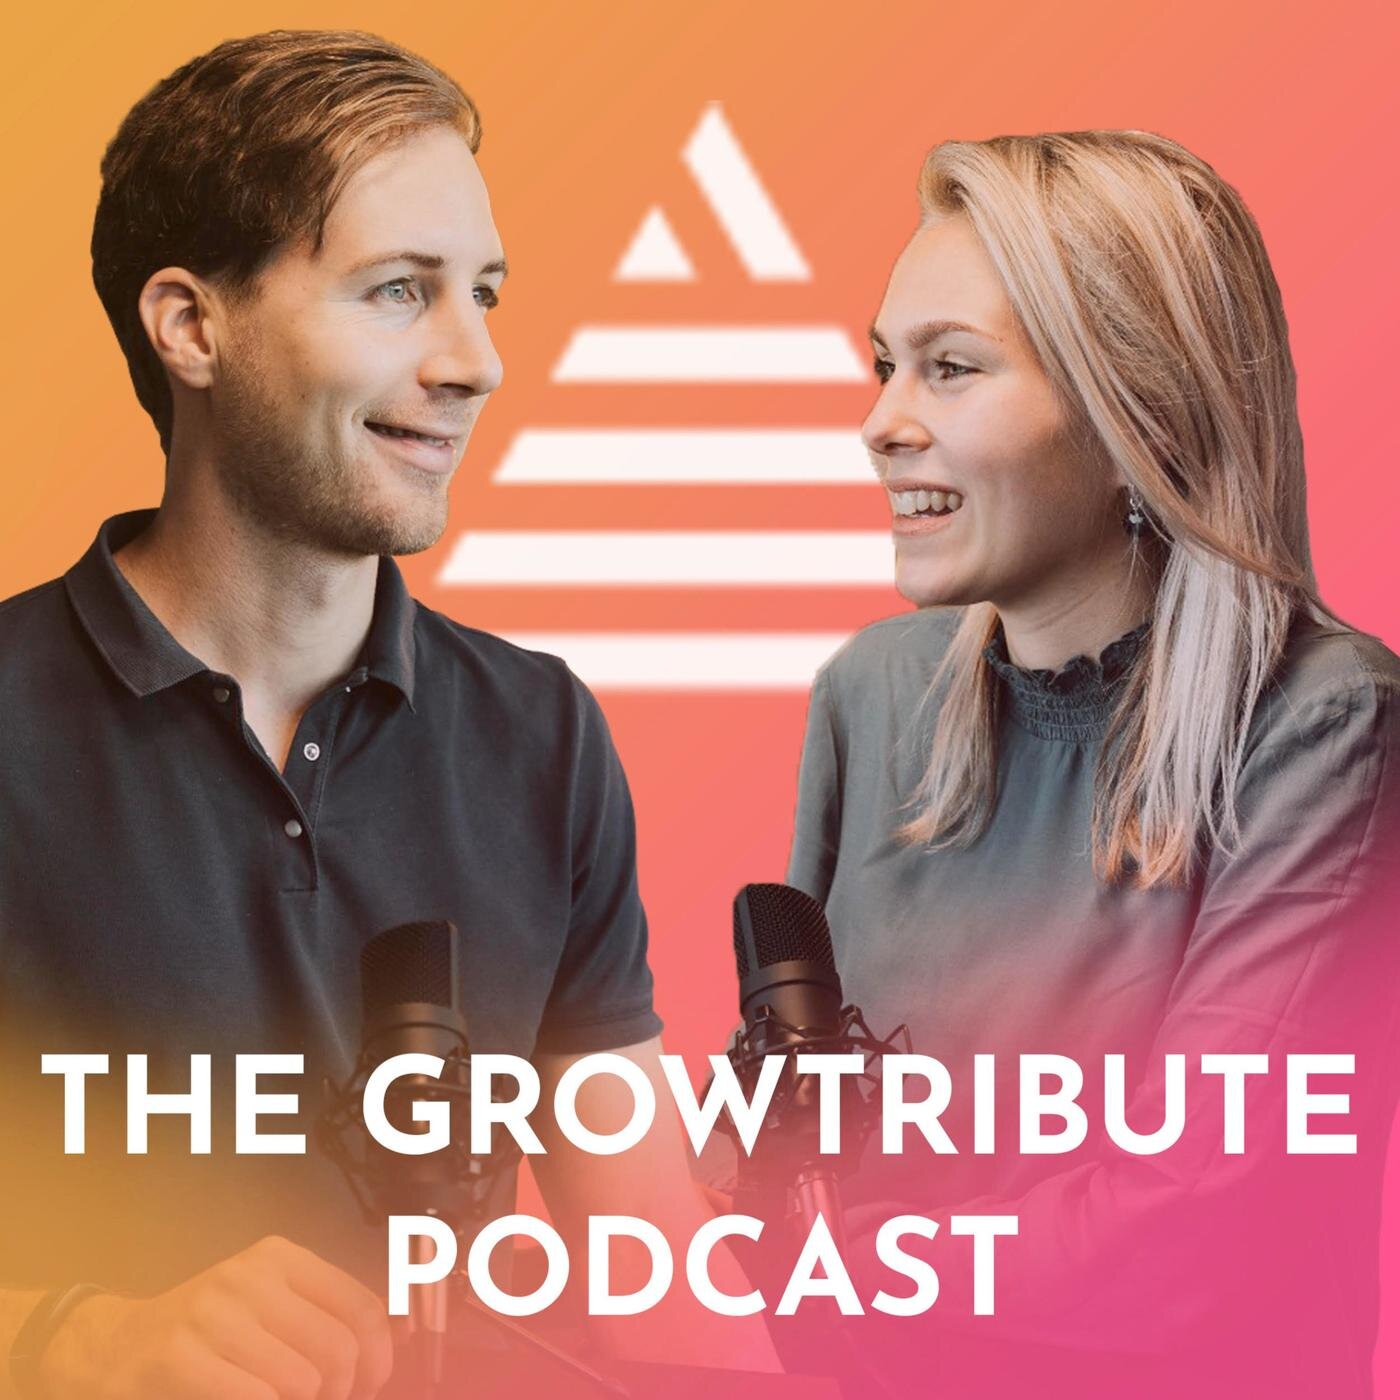 The Growtribute Podcast